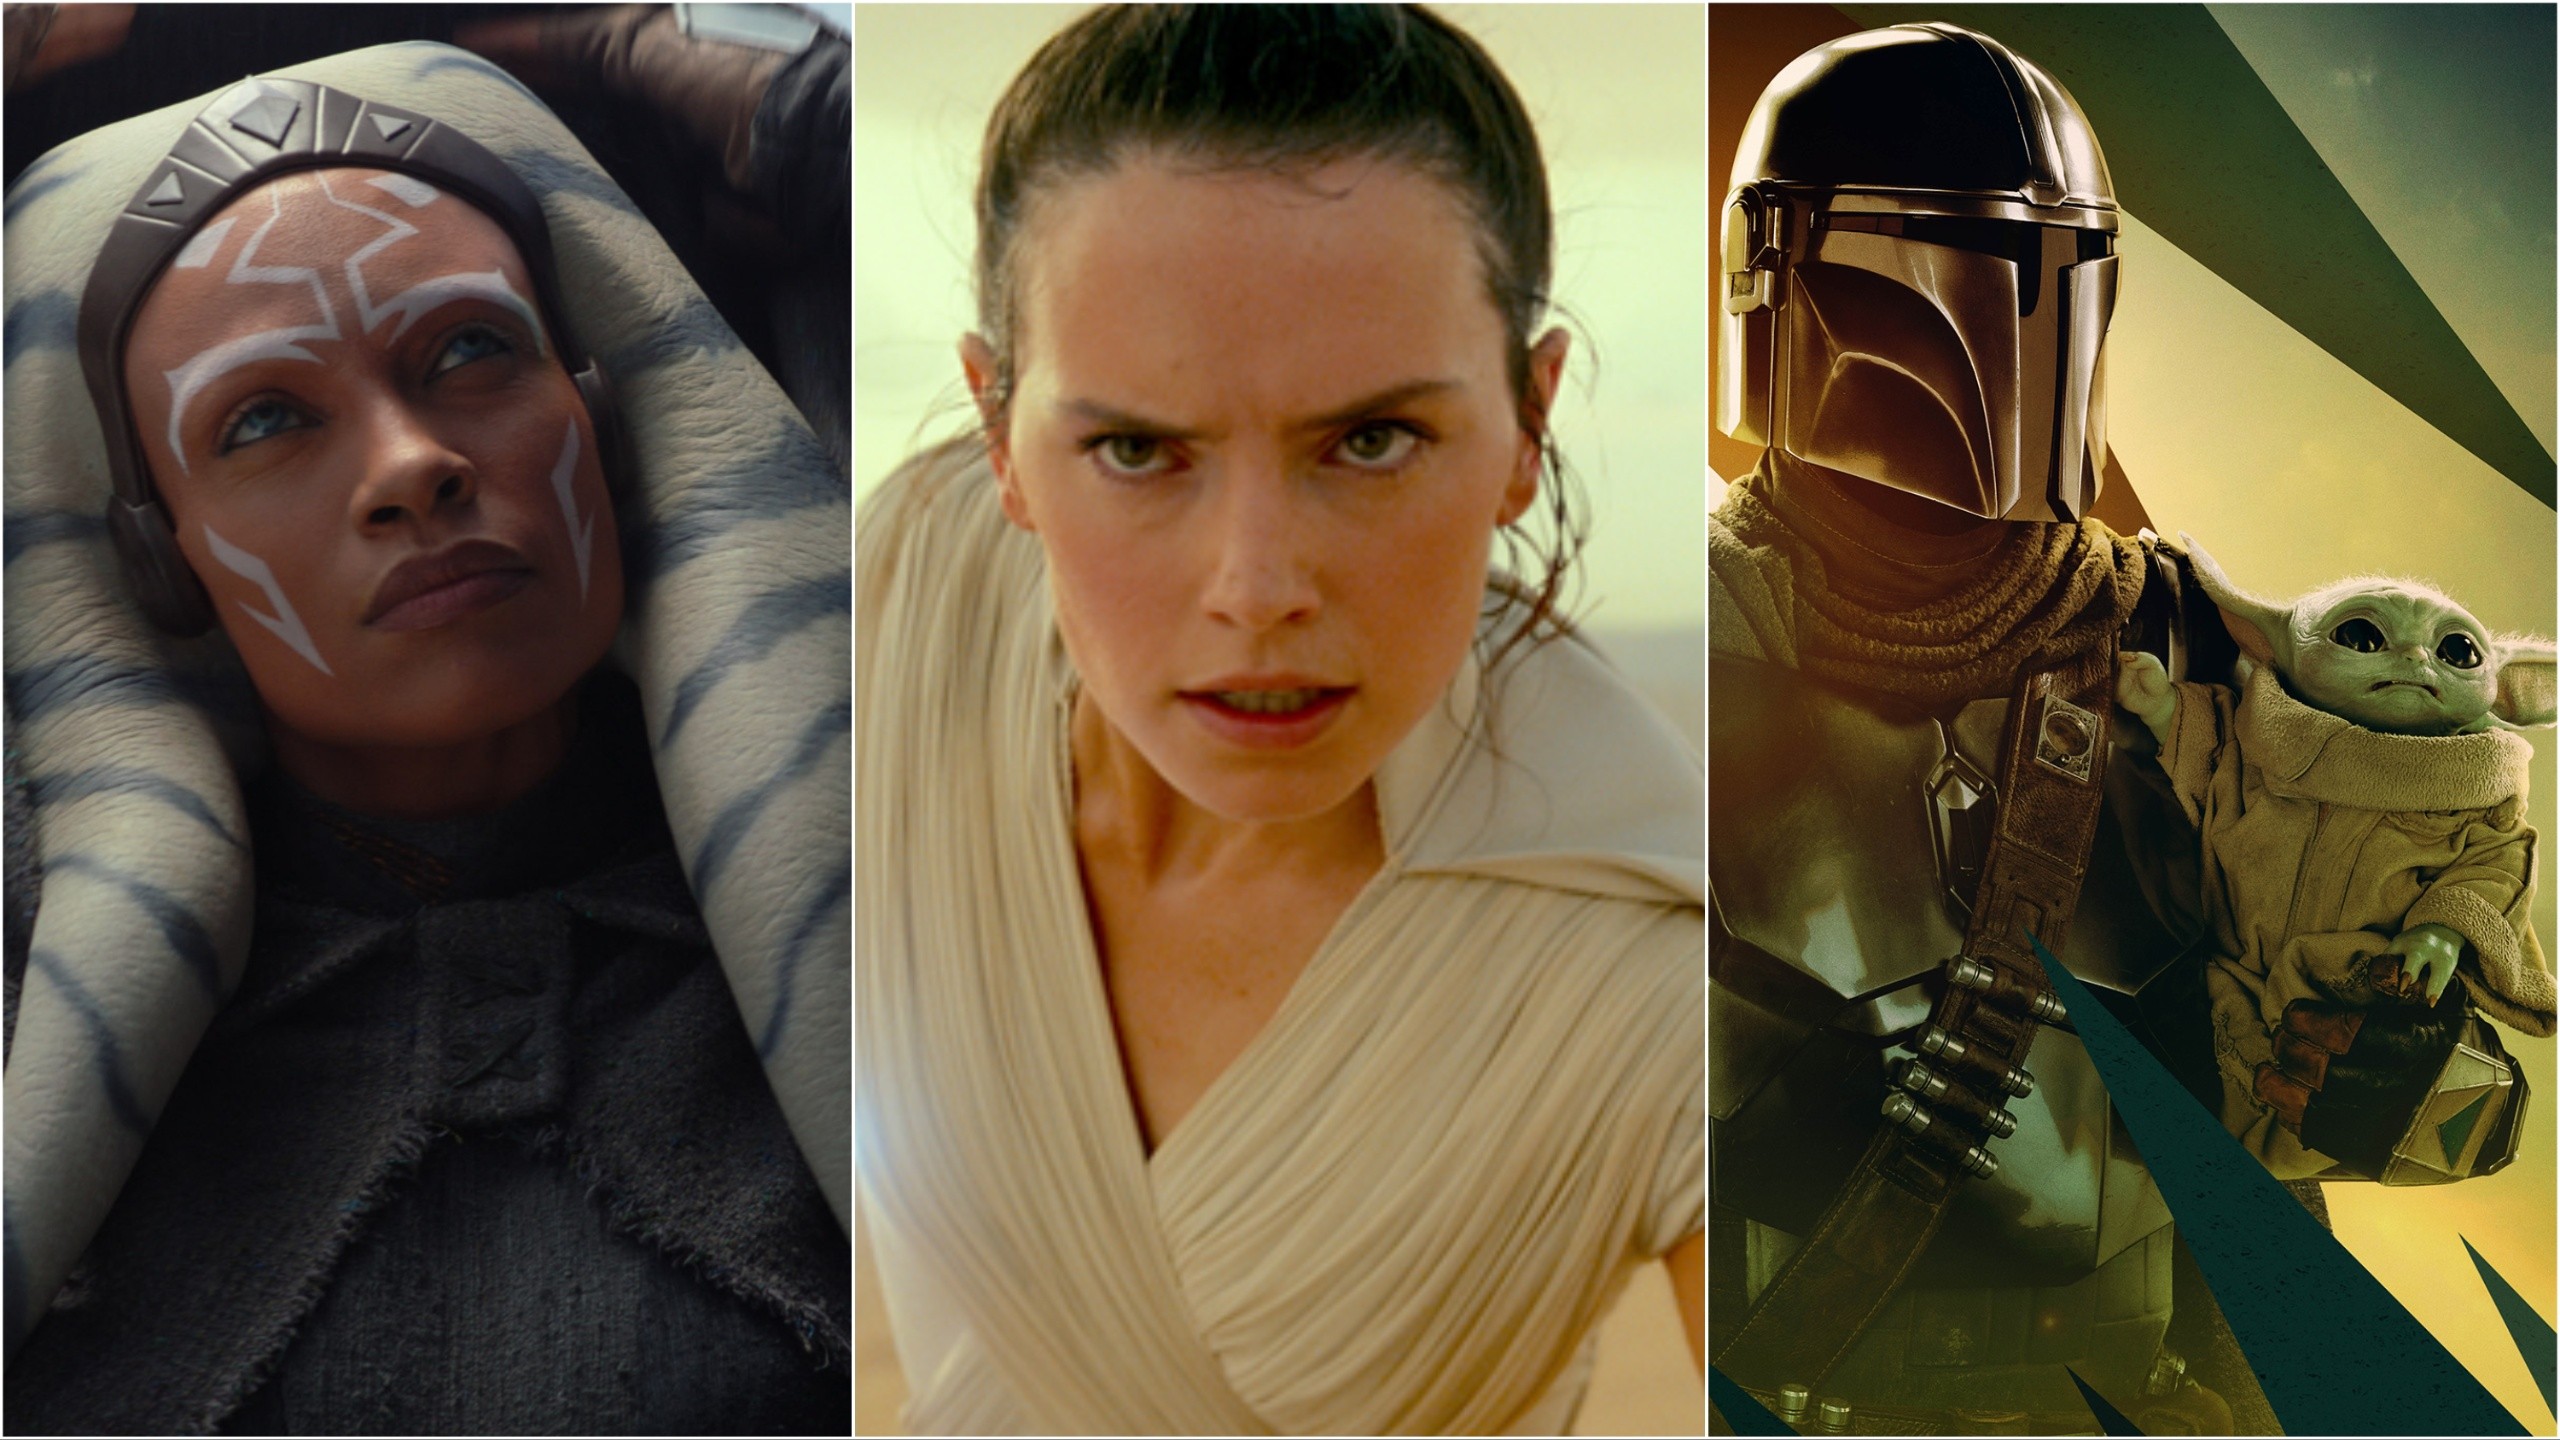 Star Wars: Every Upcoming New Movie and TV Show Confirmed So Far